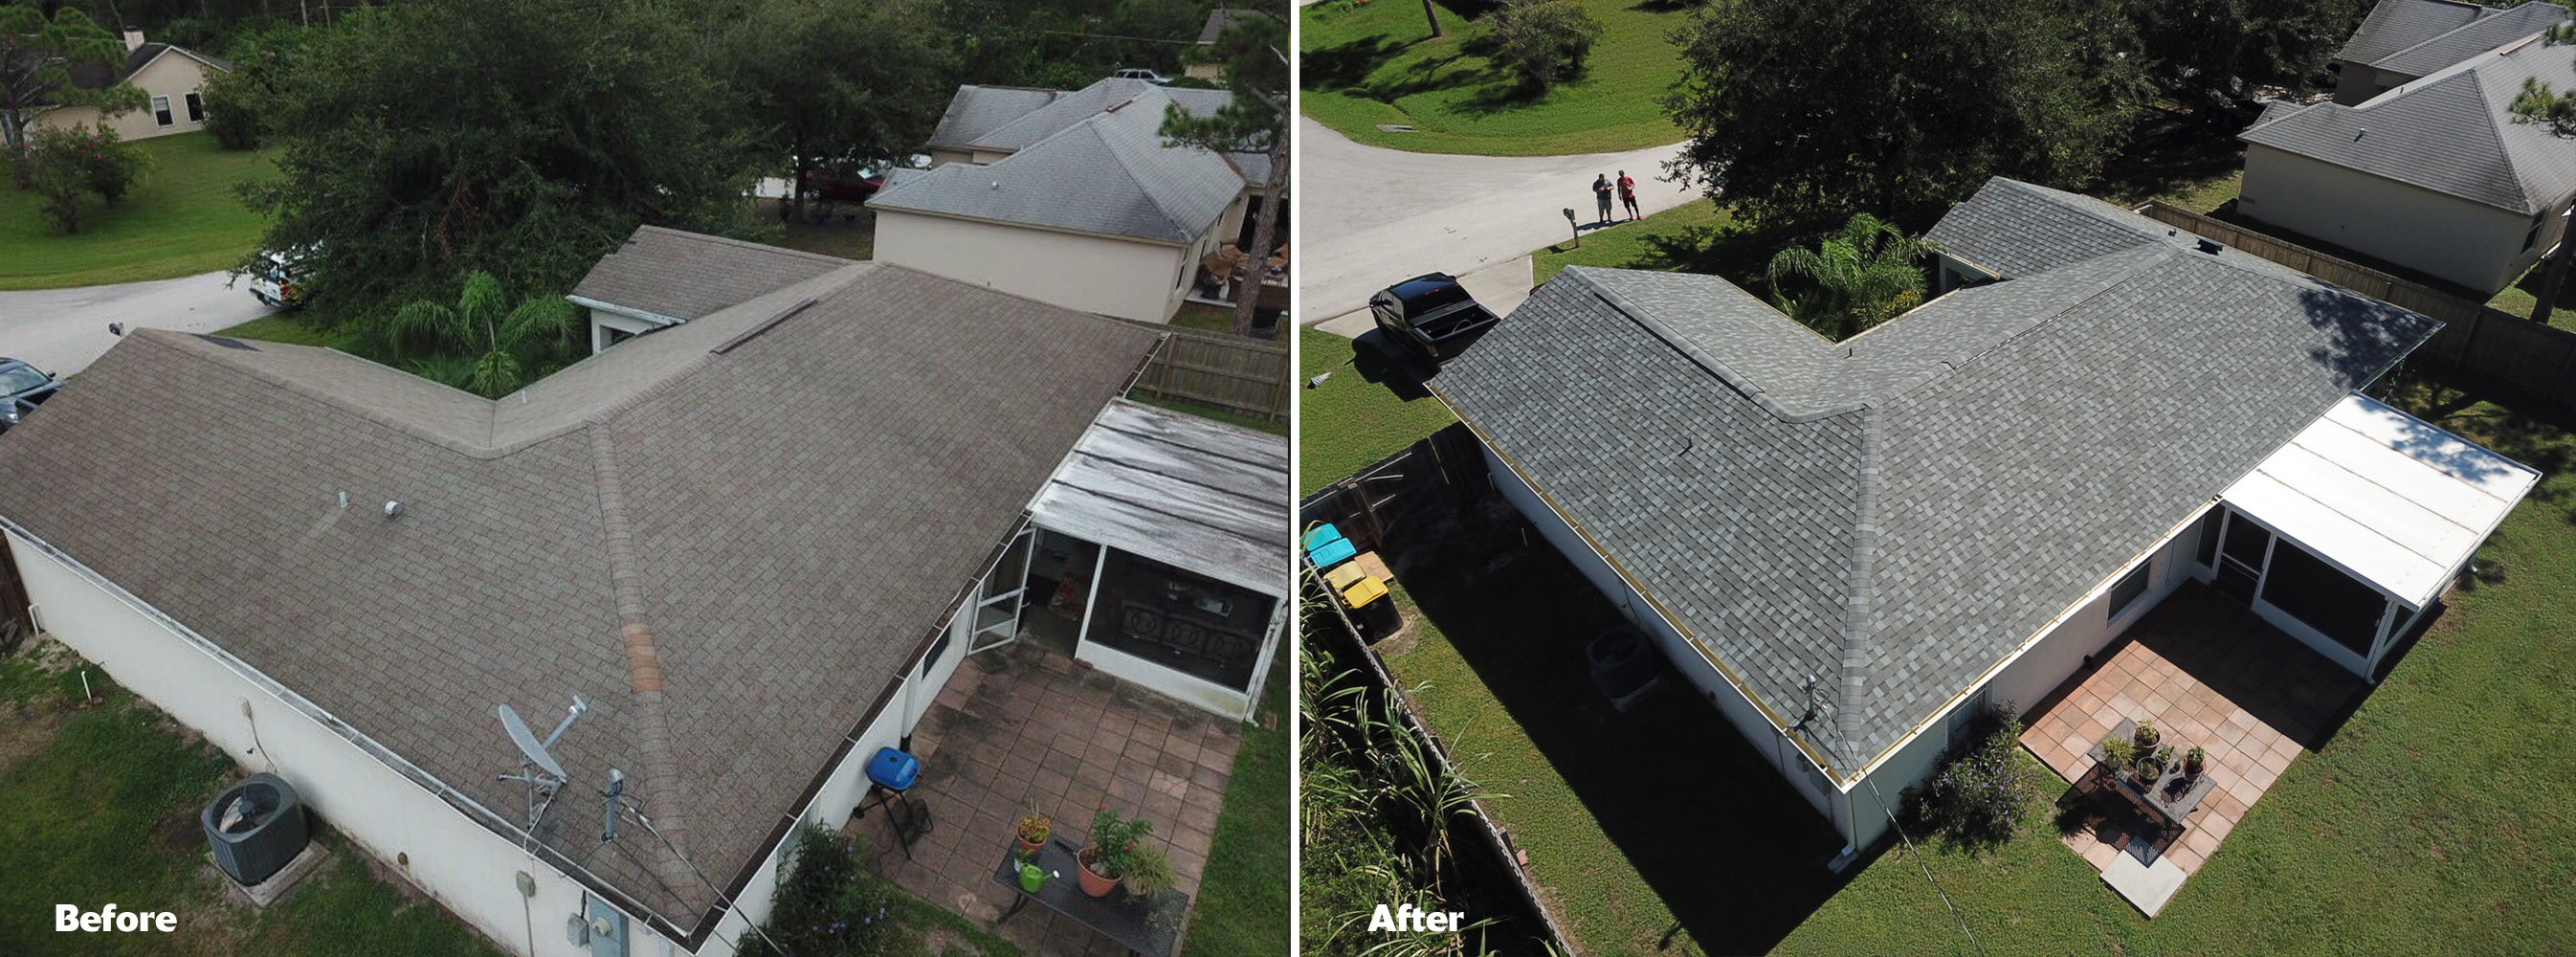 Langford roof - before and after